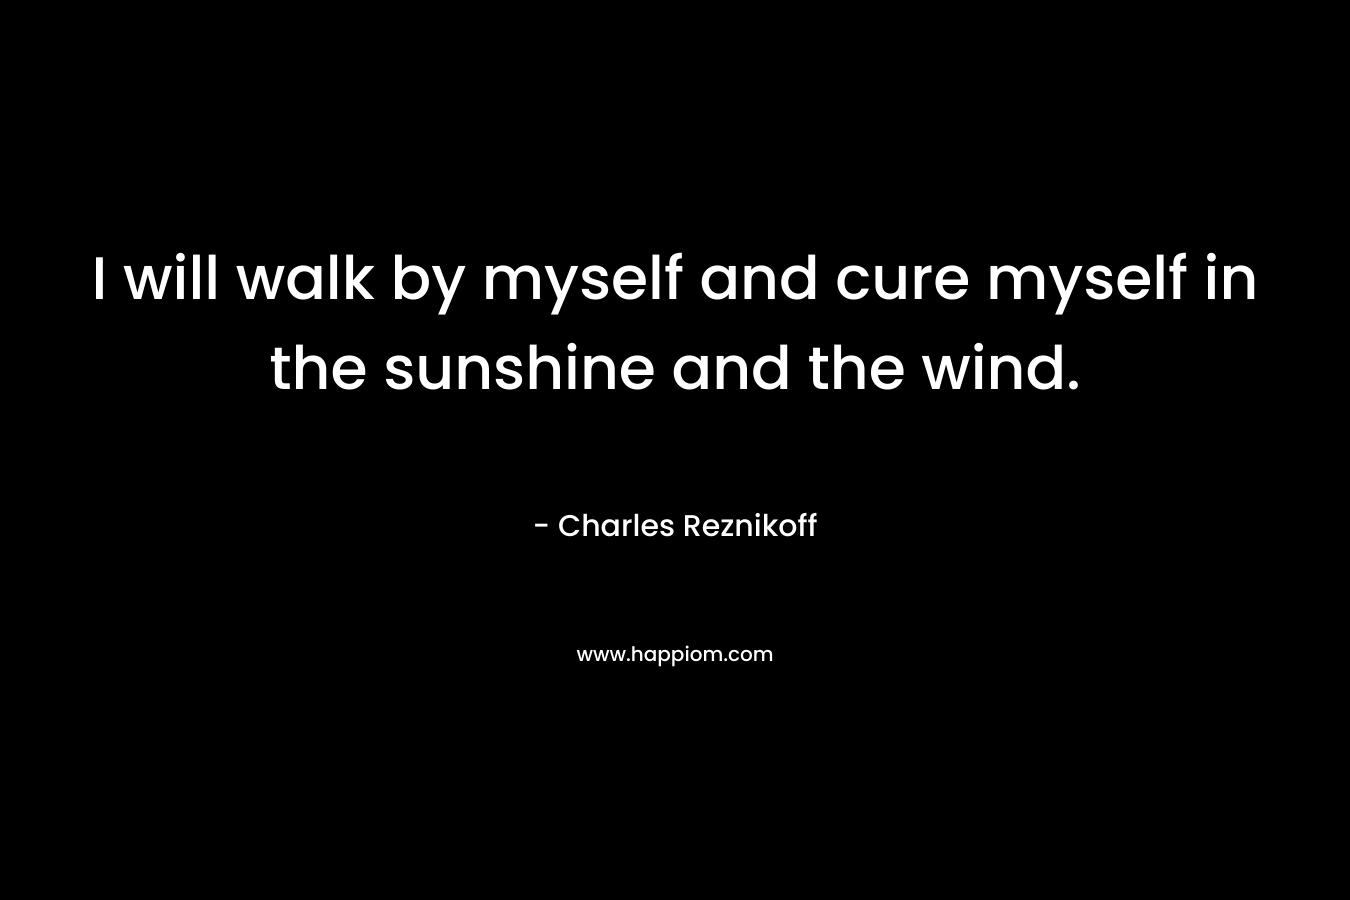 I will walk by myself and cure myself in the sunshine and the wind.